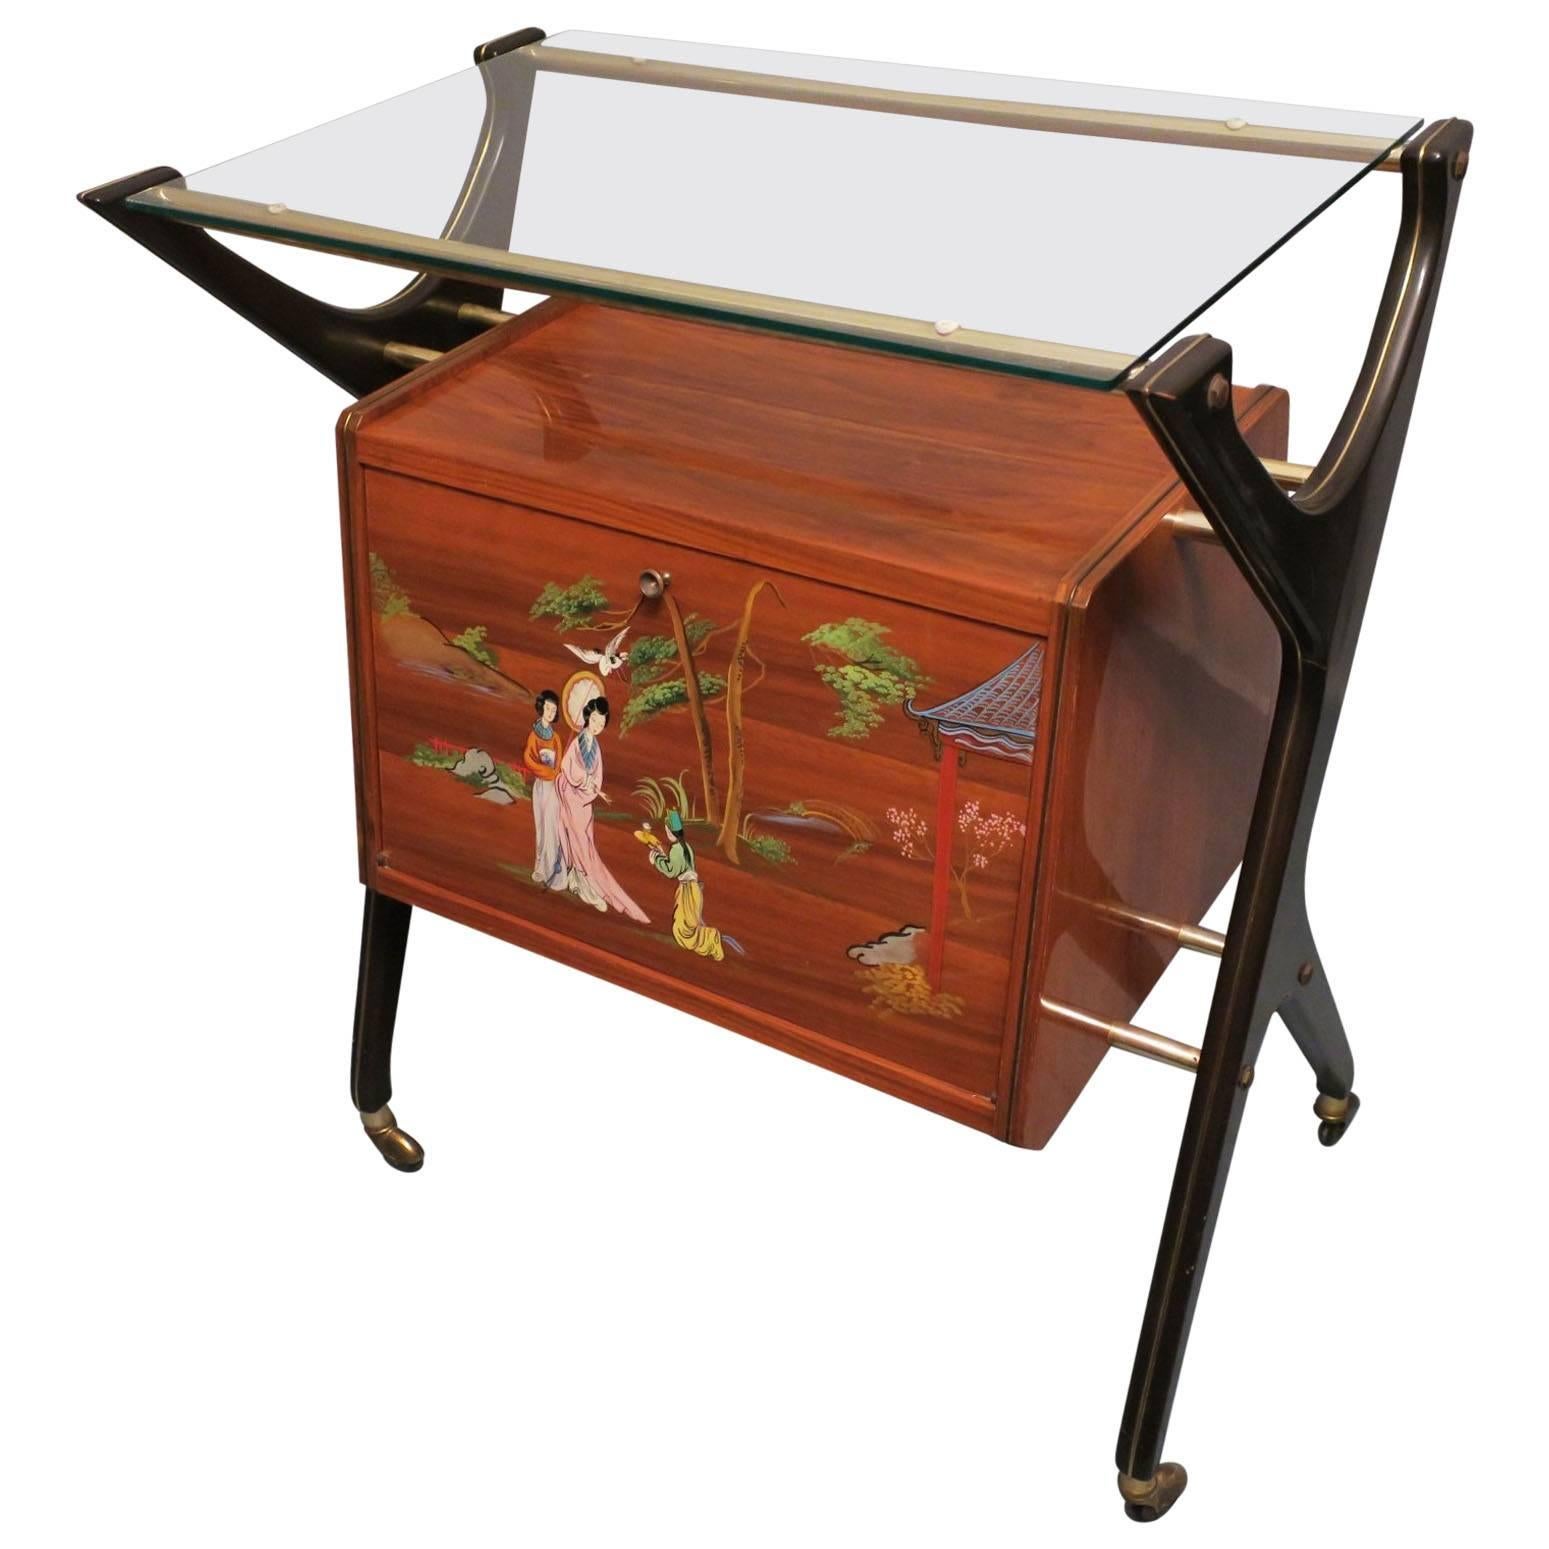 Italian bar cart or dry bar from the 1950s with a bright yellow interior. On the outside are painted Japanese figures.
The bar lights up automatically on opening the door flap.